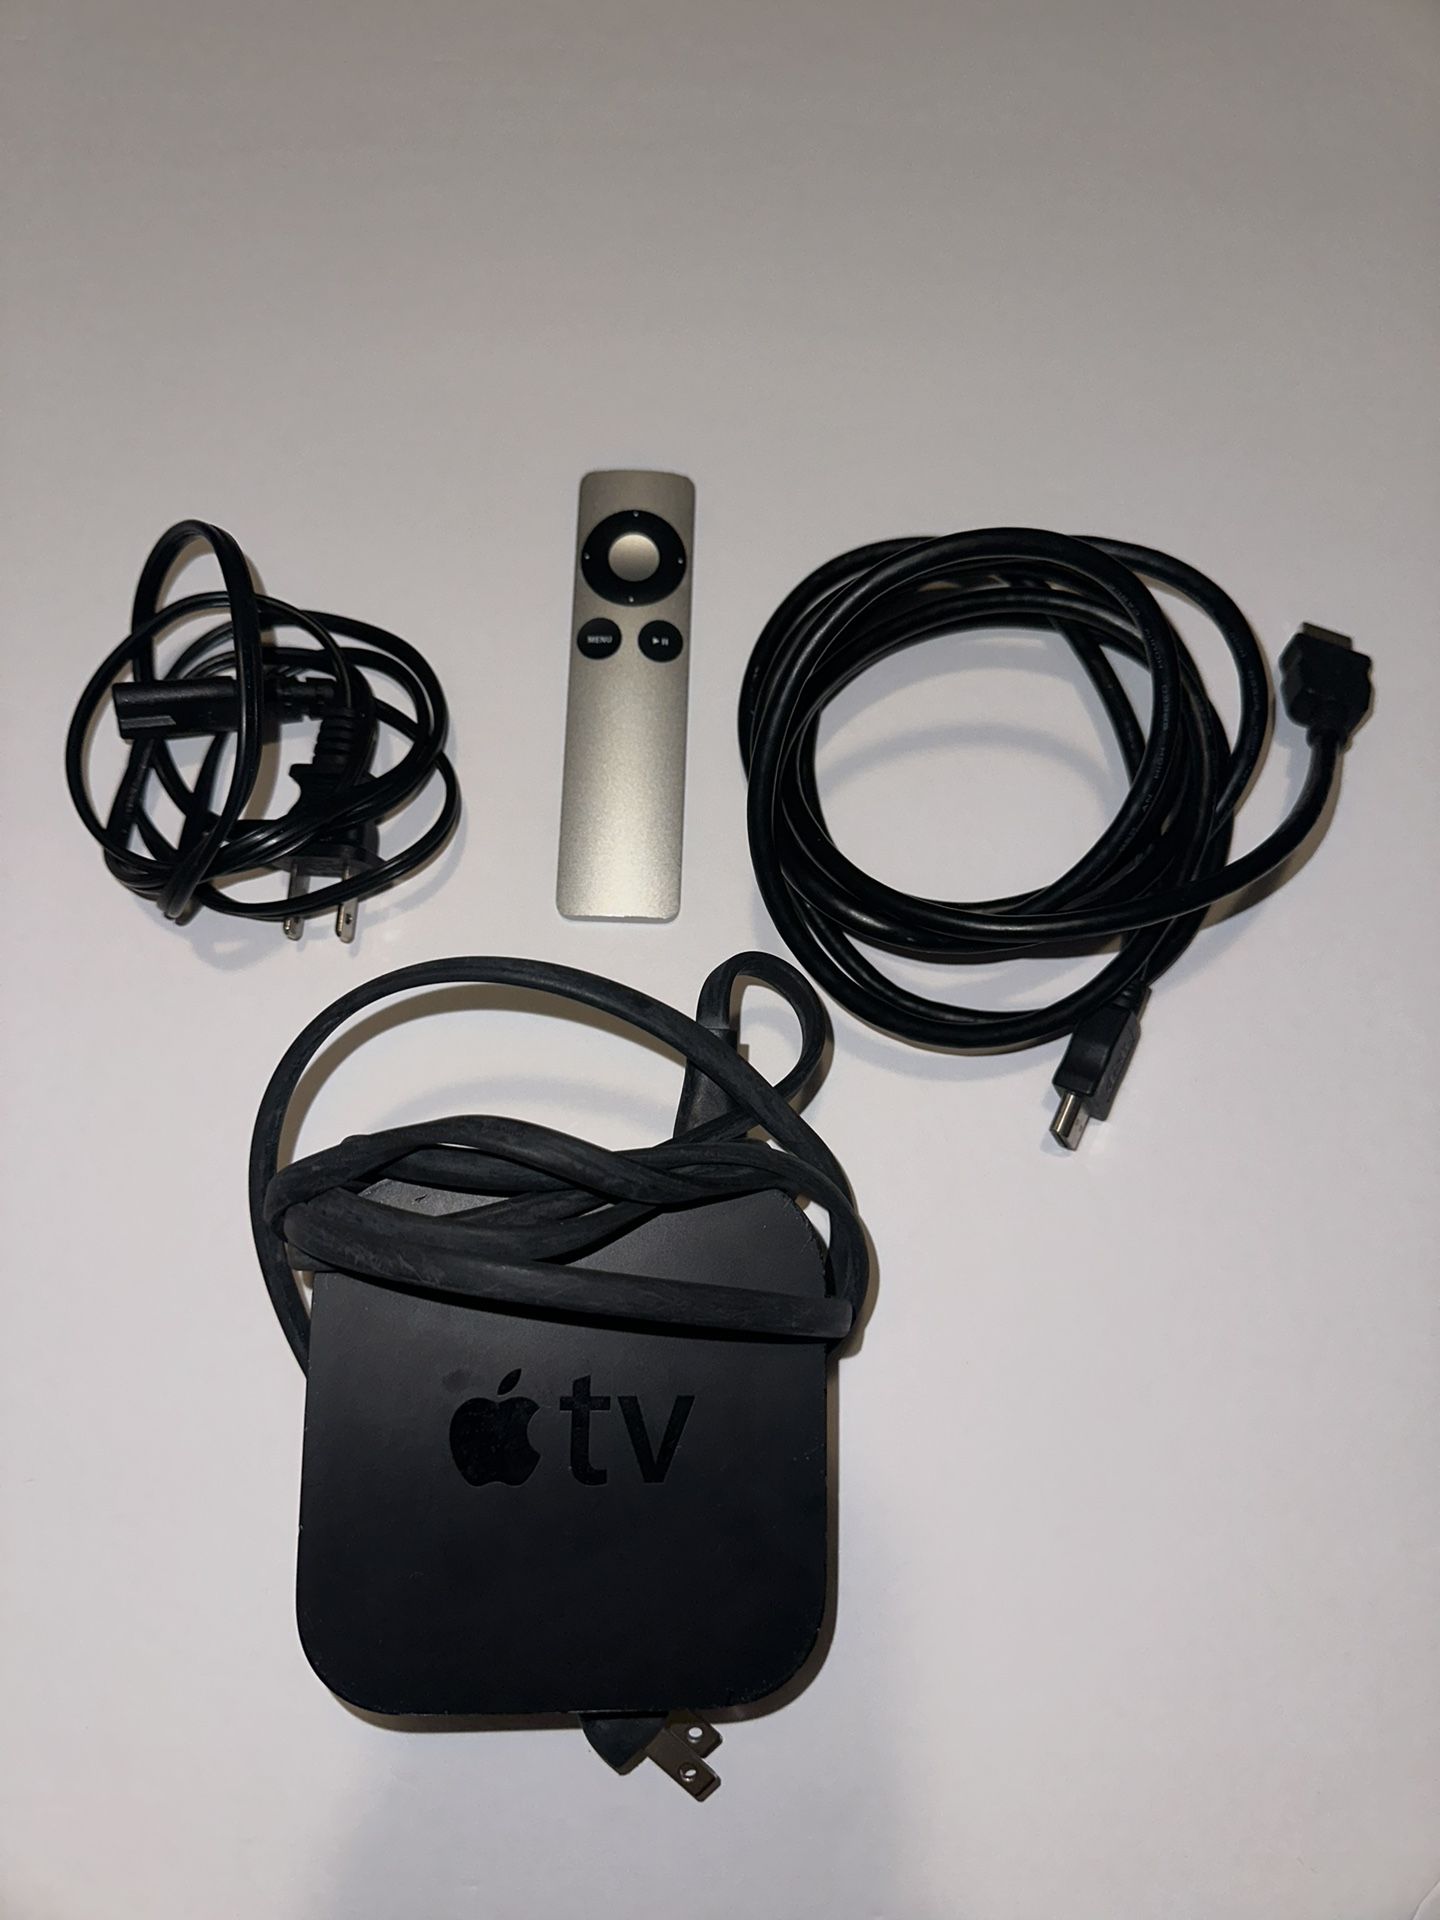 Apple TV Set Up With Control, Chords Included 